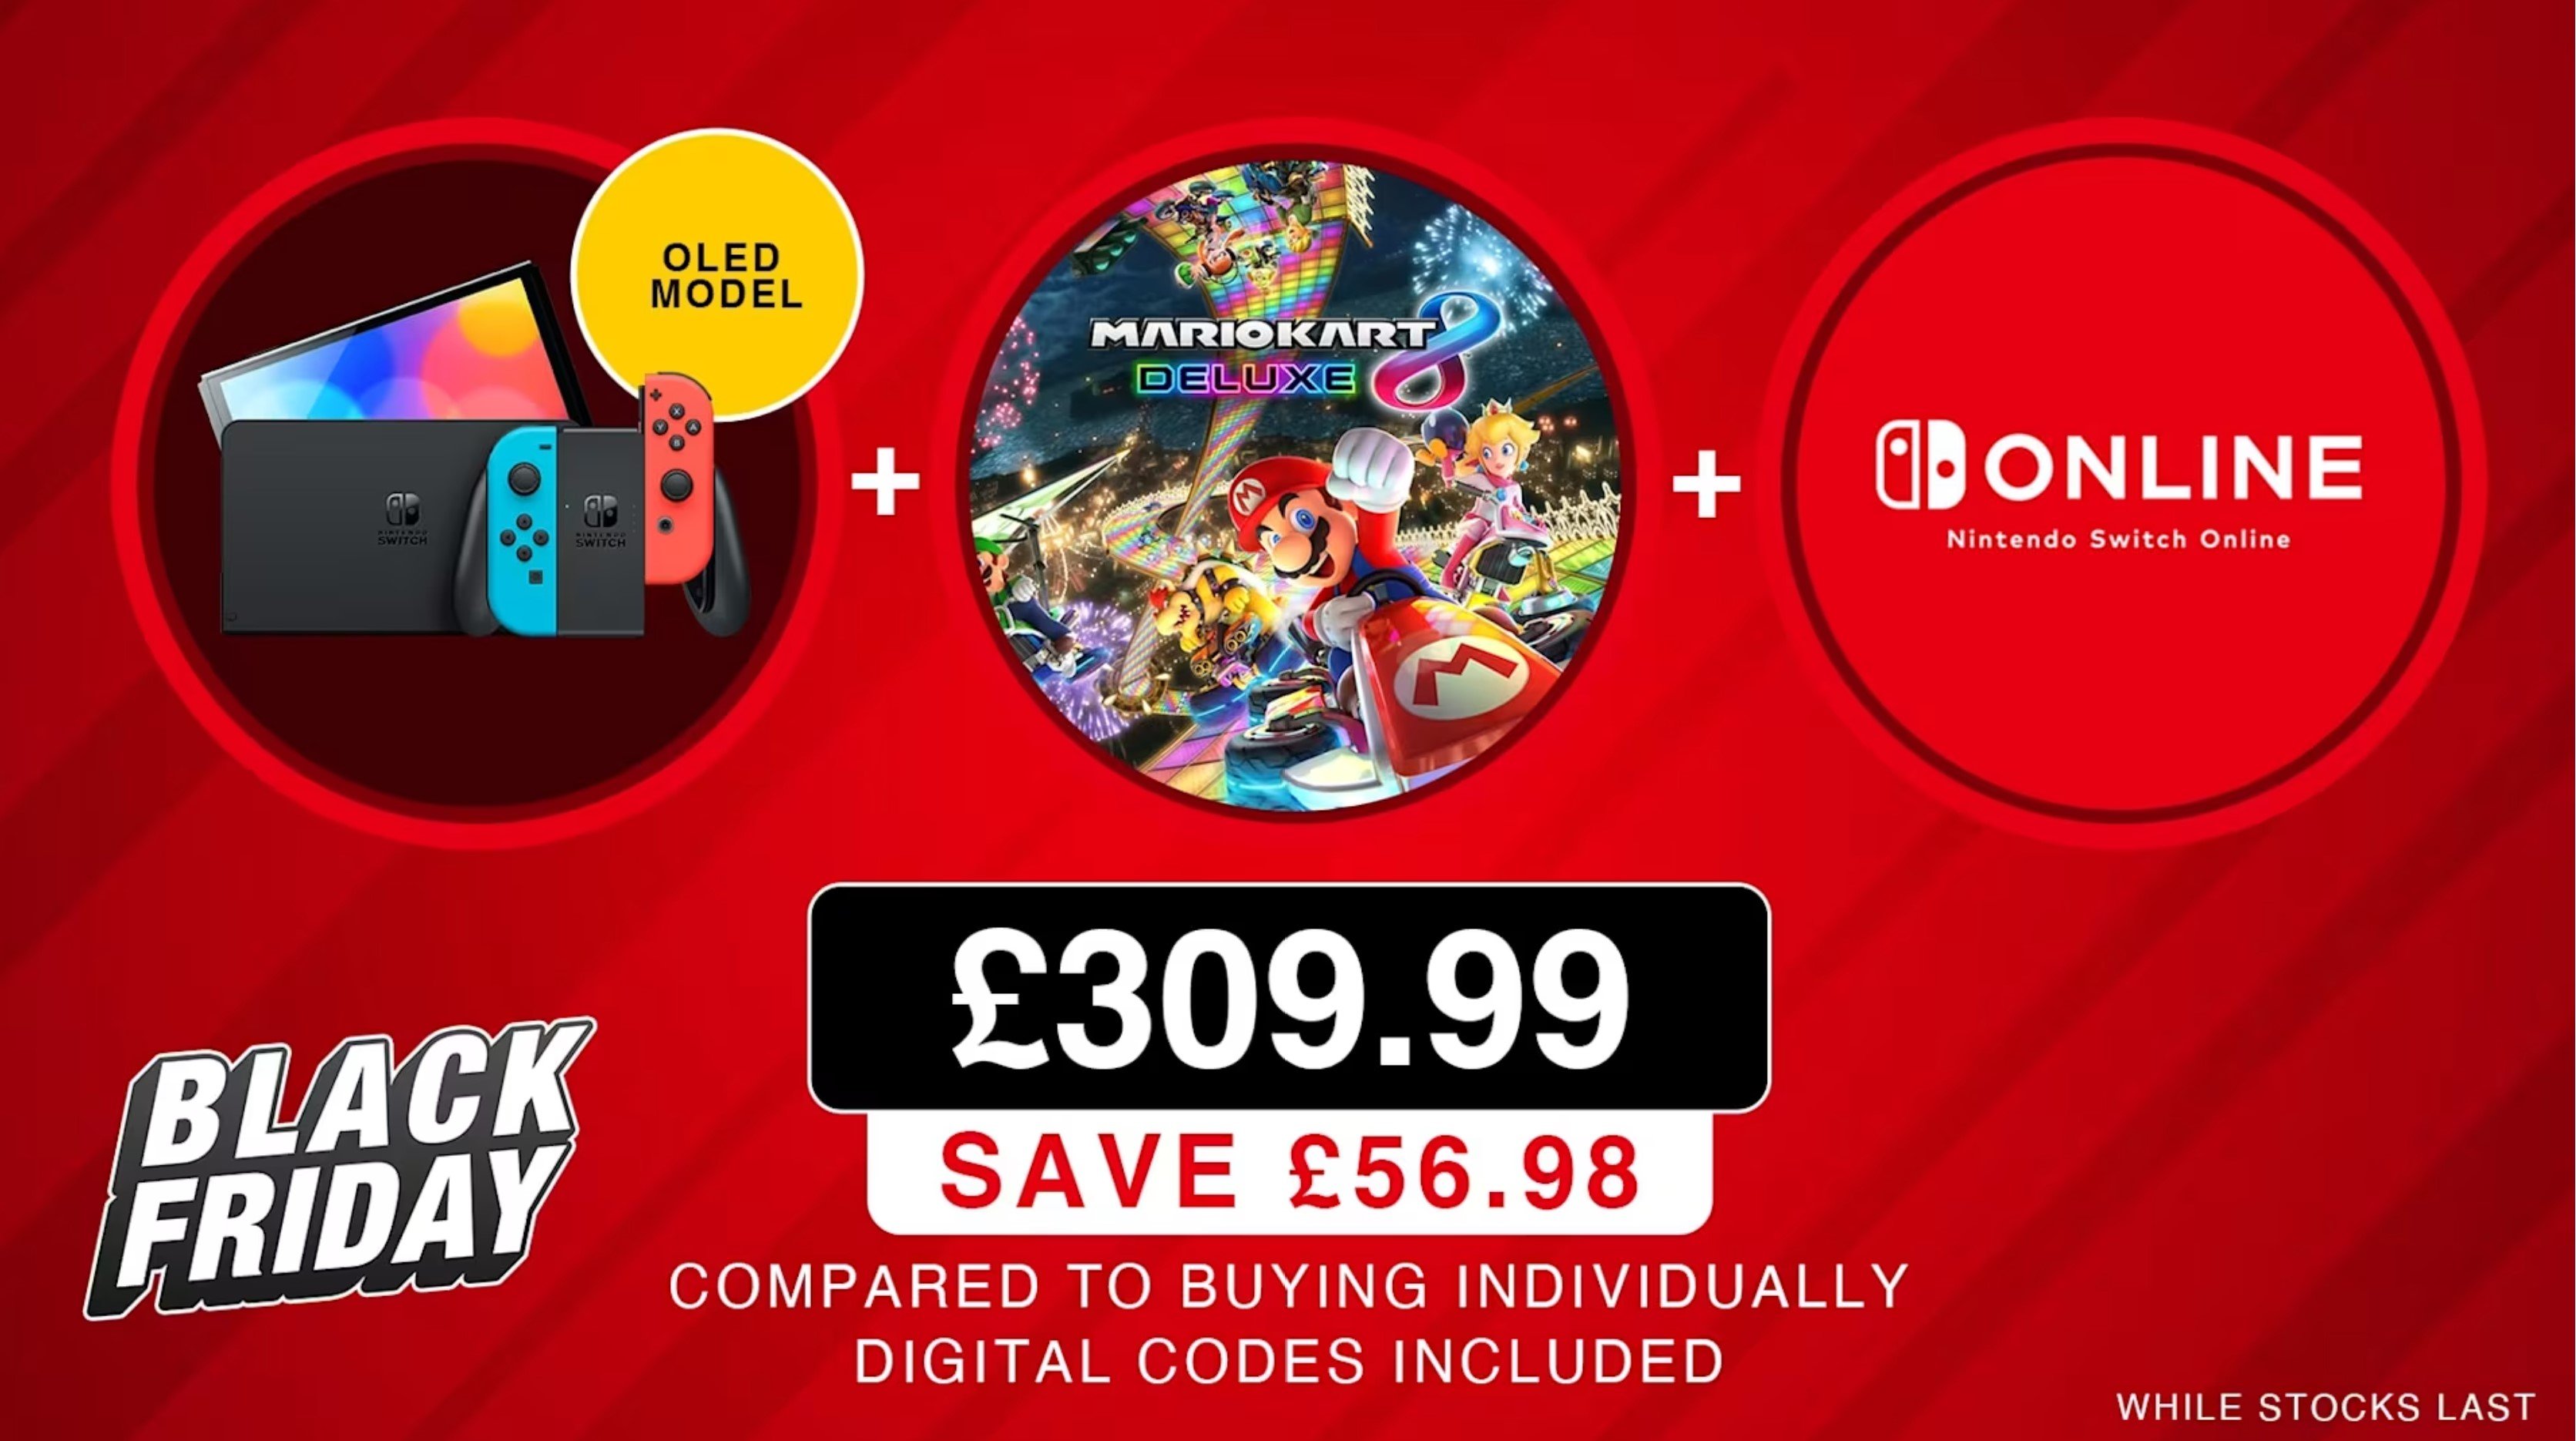 Nintendo UK Black Friday deal offers a Switch OLED with Mario Kart 8 Deluxe for £57 off | VGC